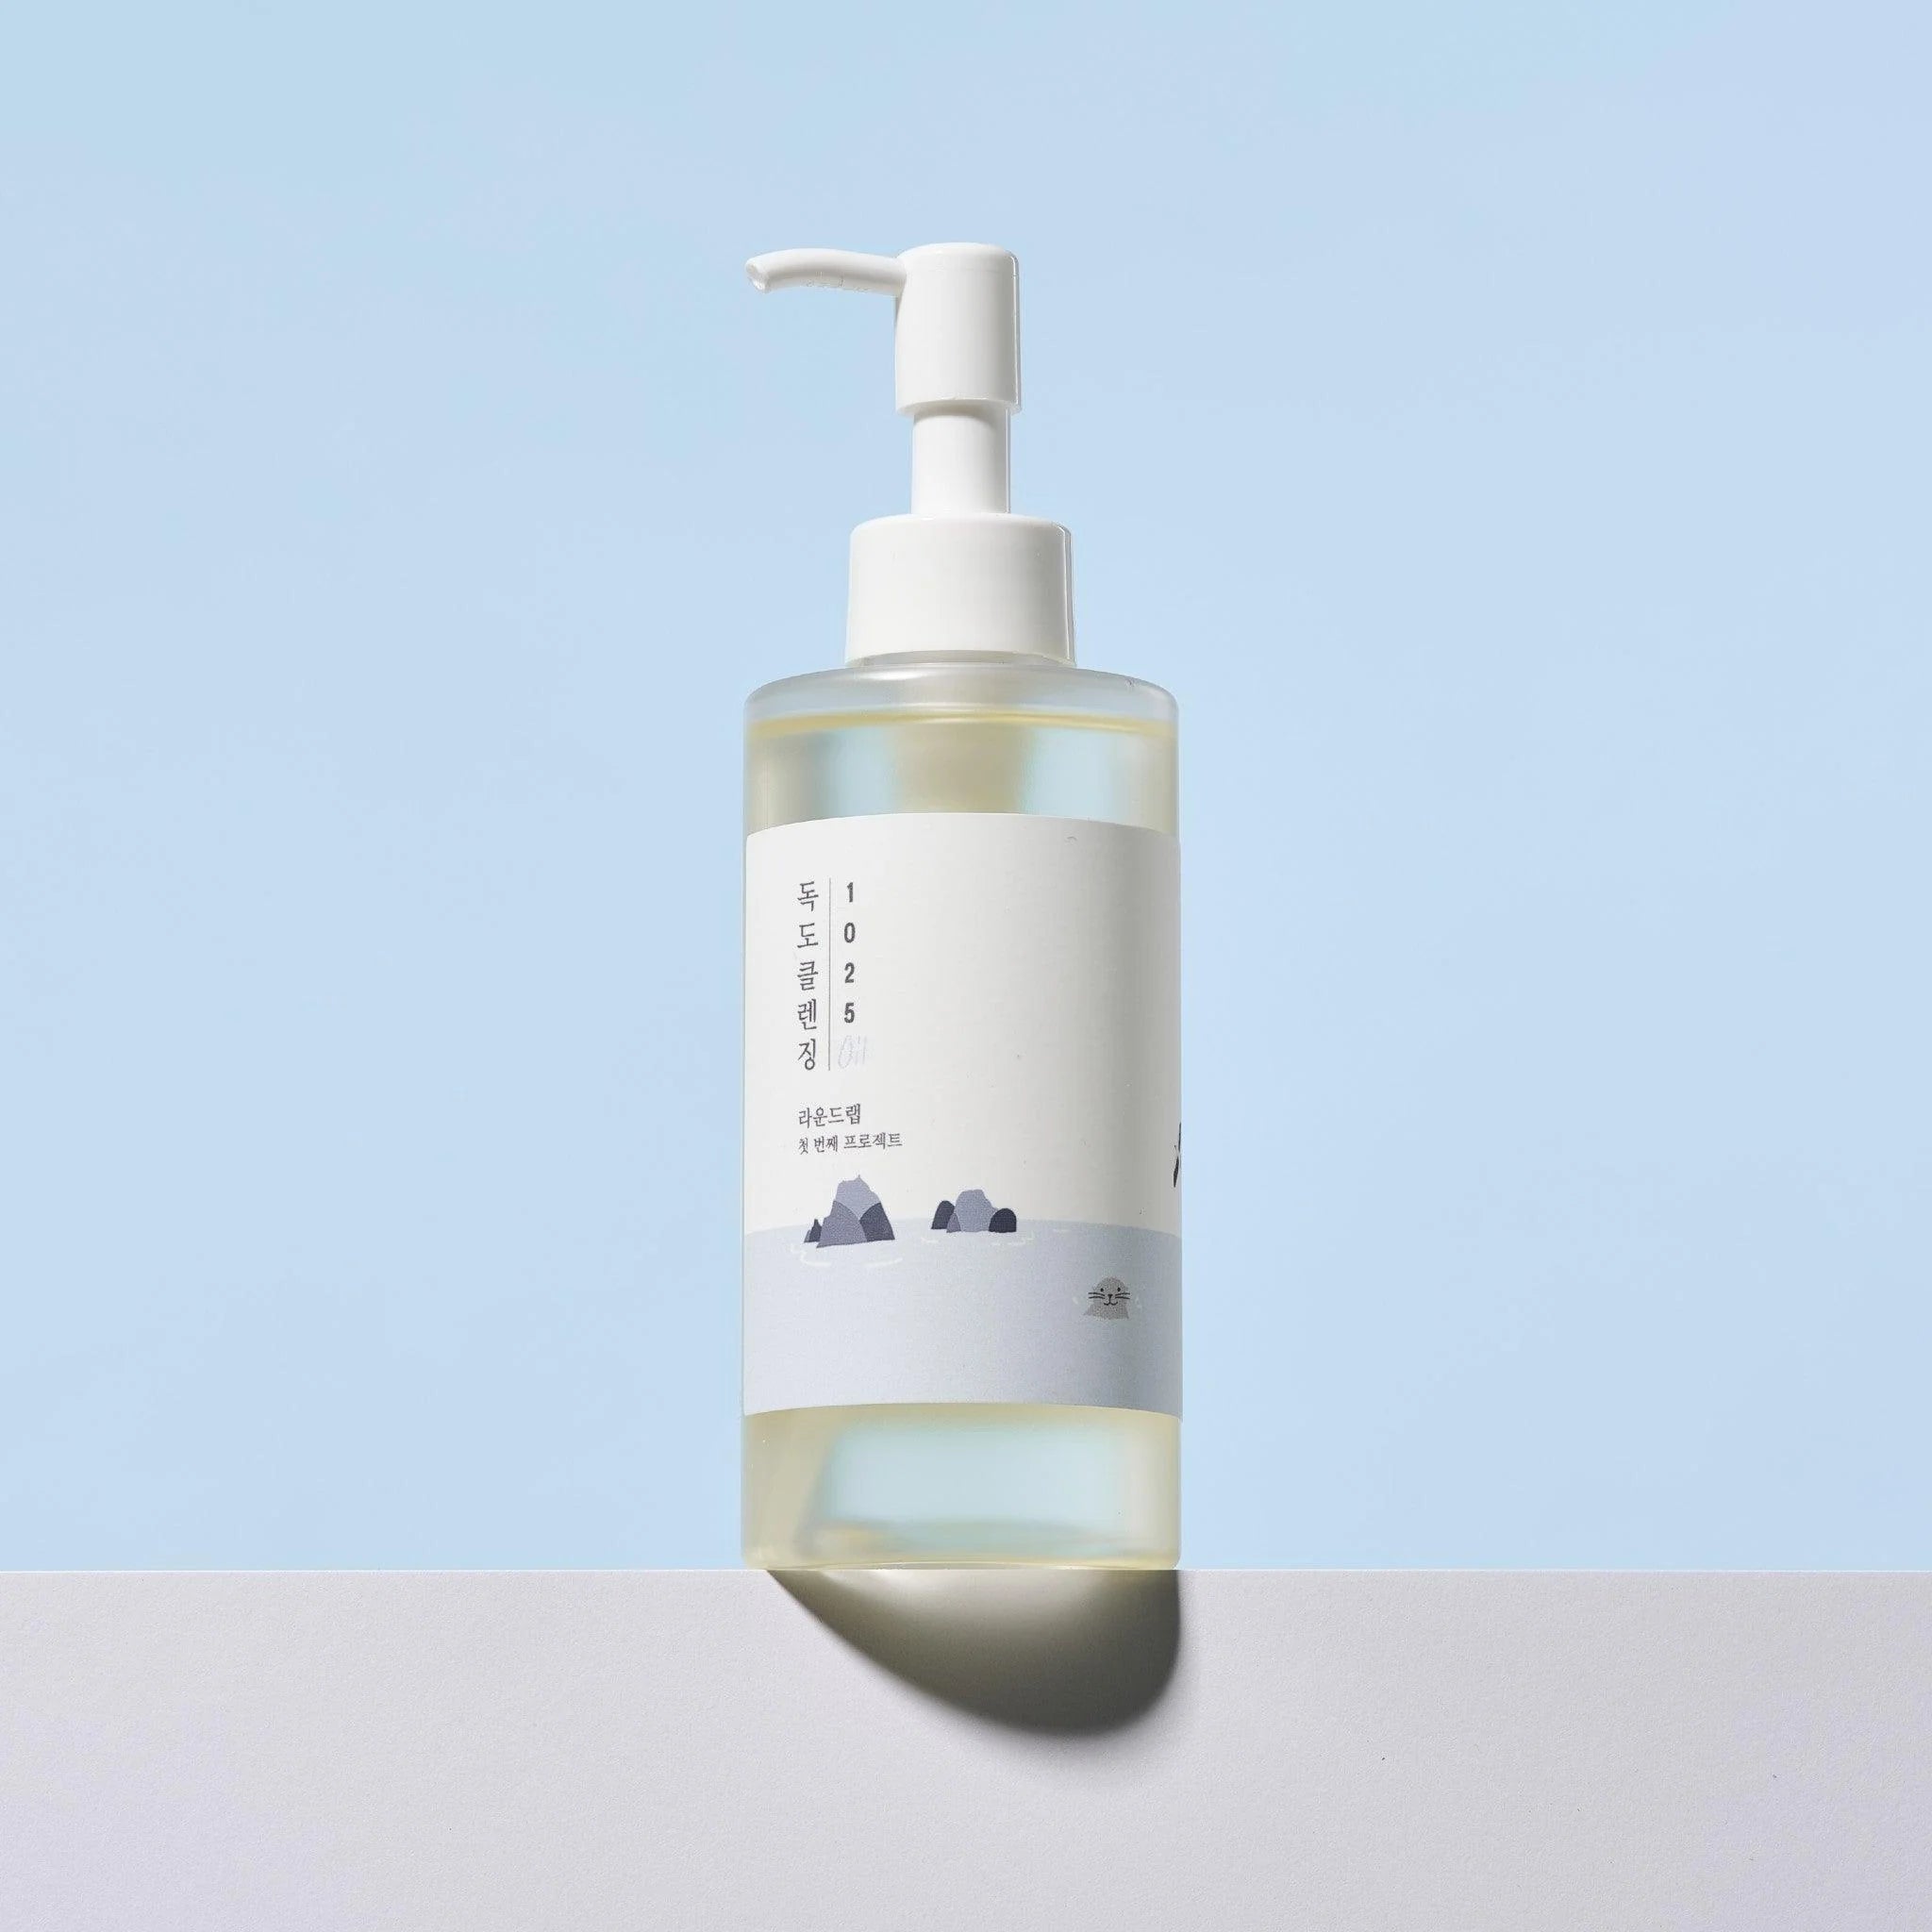 Gentle hydrophilic makeup removal oil by Round Lab (Round Lab 1025 Dokdo Cleansing Oil)